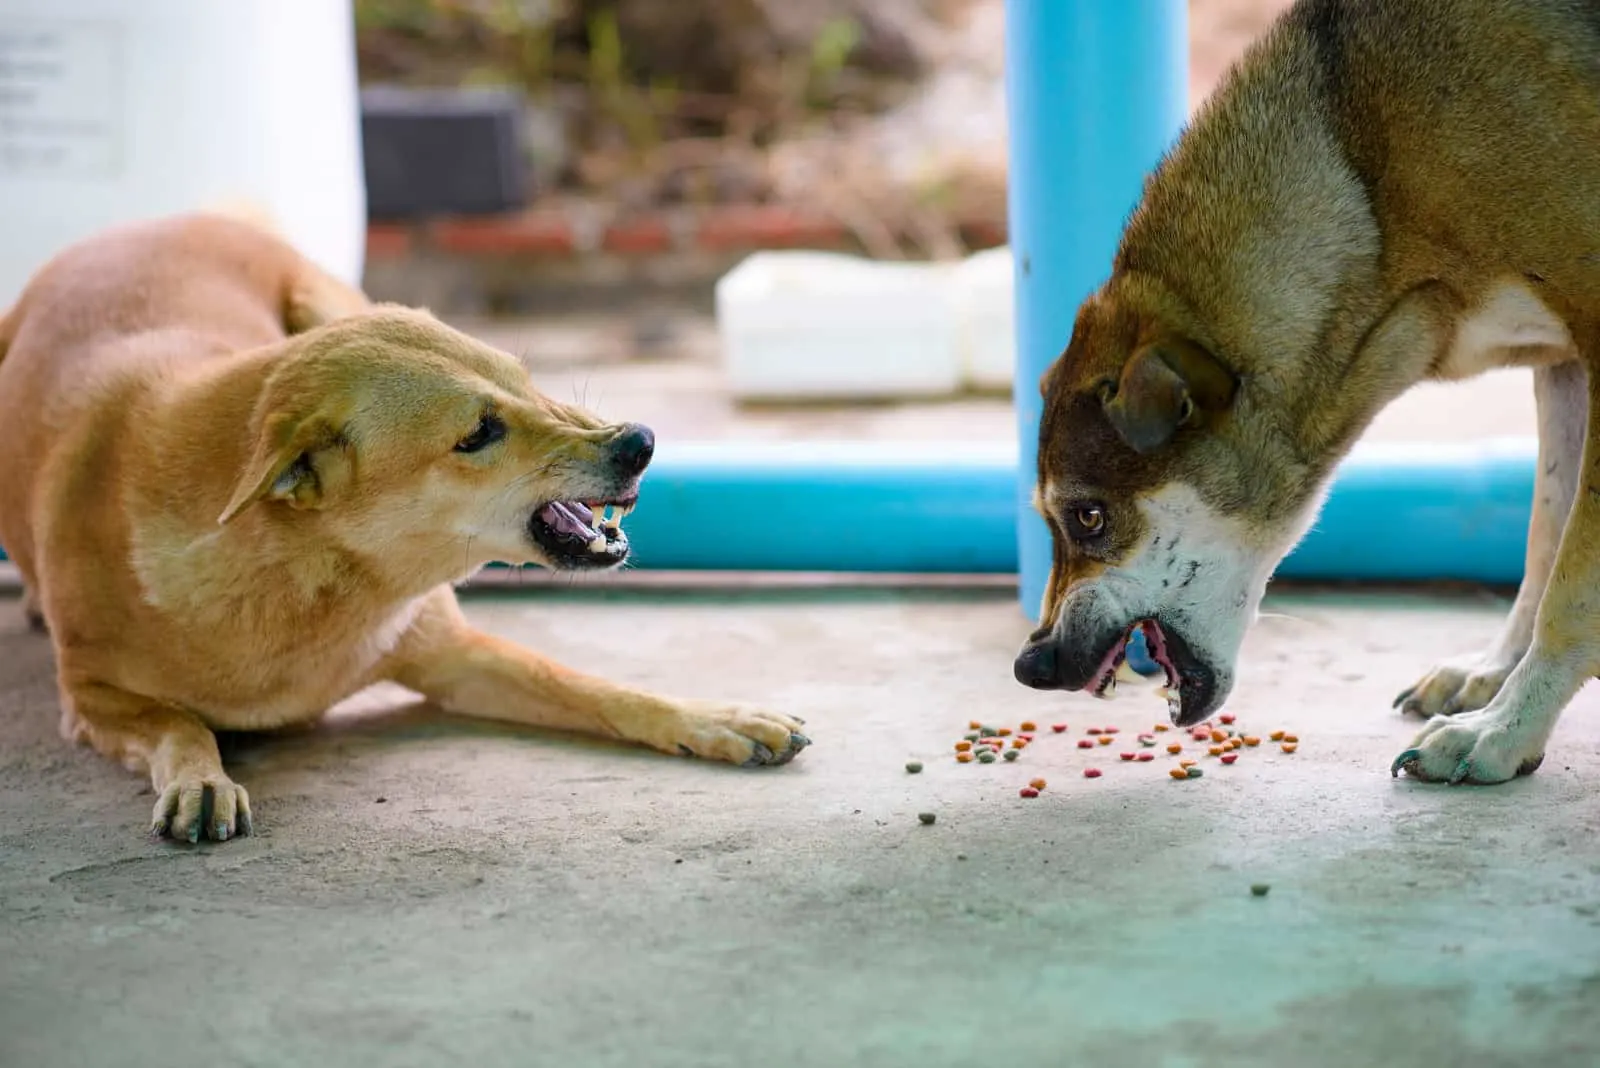 Two dogs are biting each other to compete for food